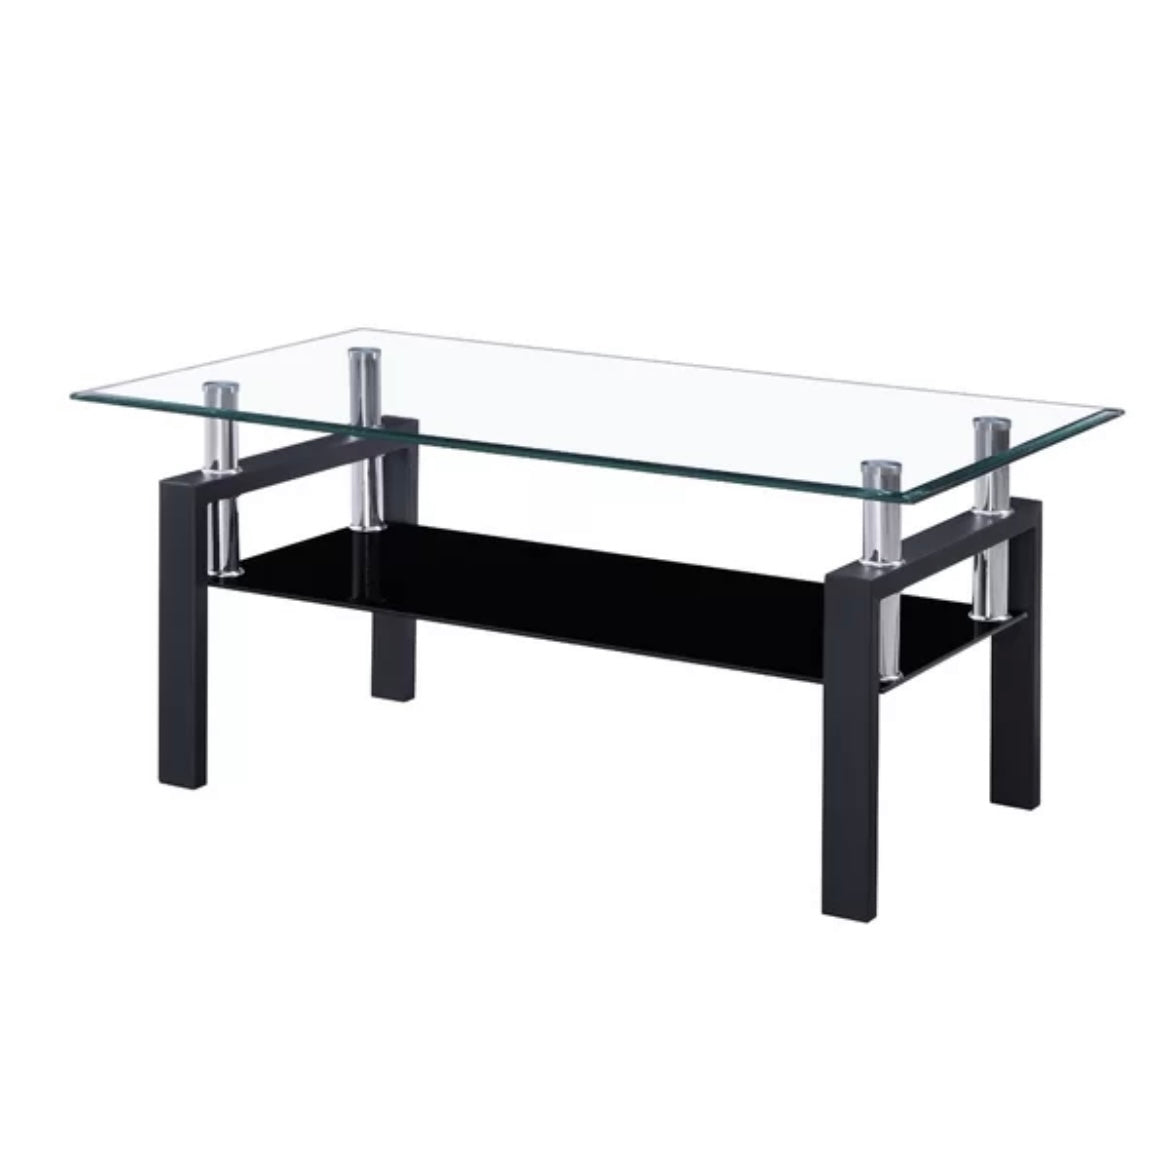 TABLE BASSE ANGELO NOIRE